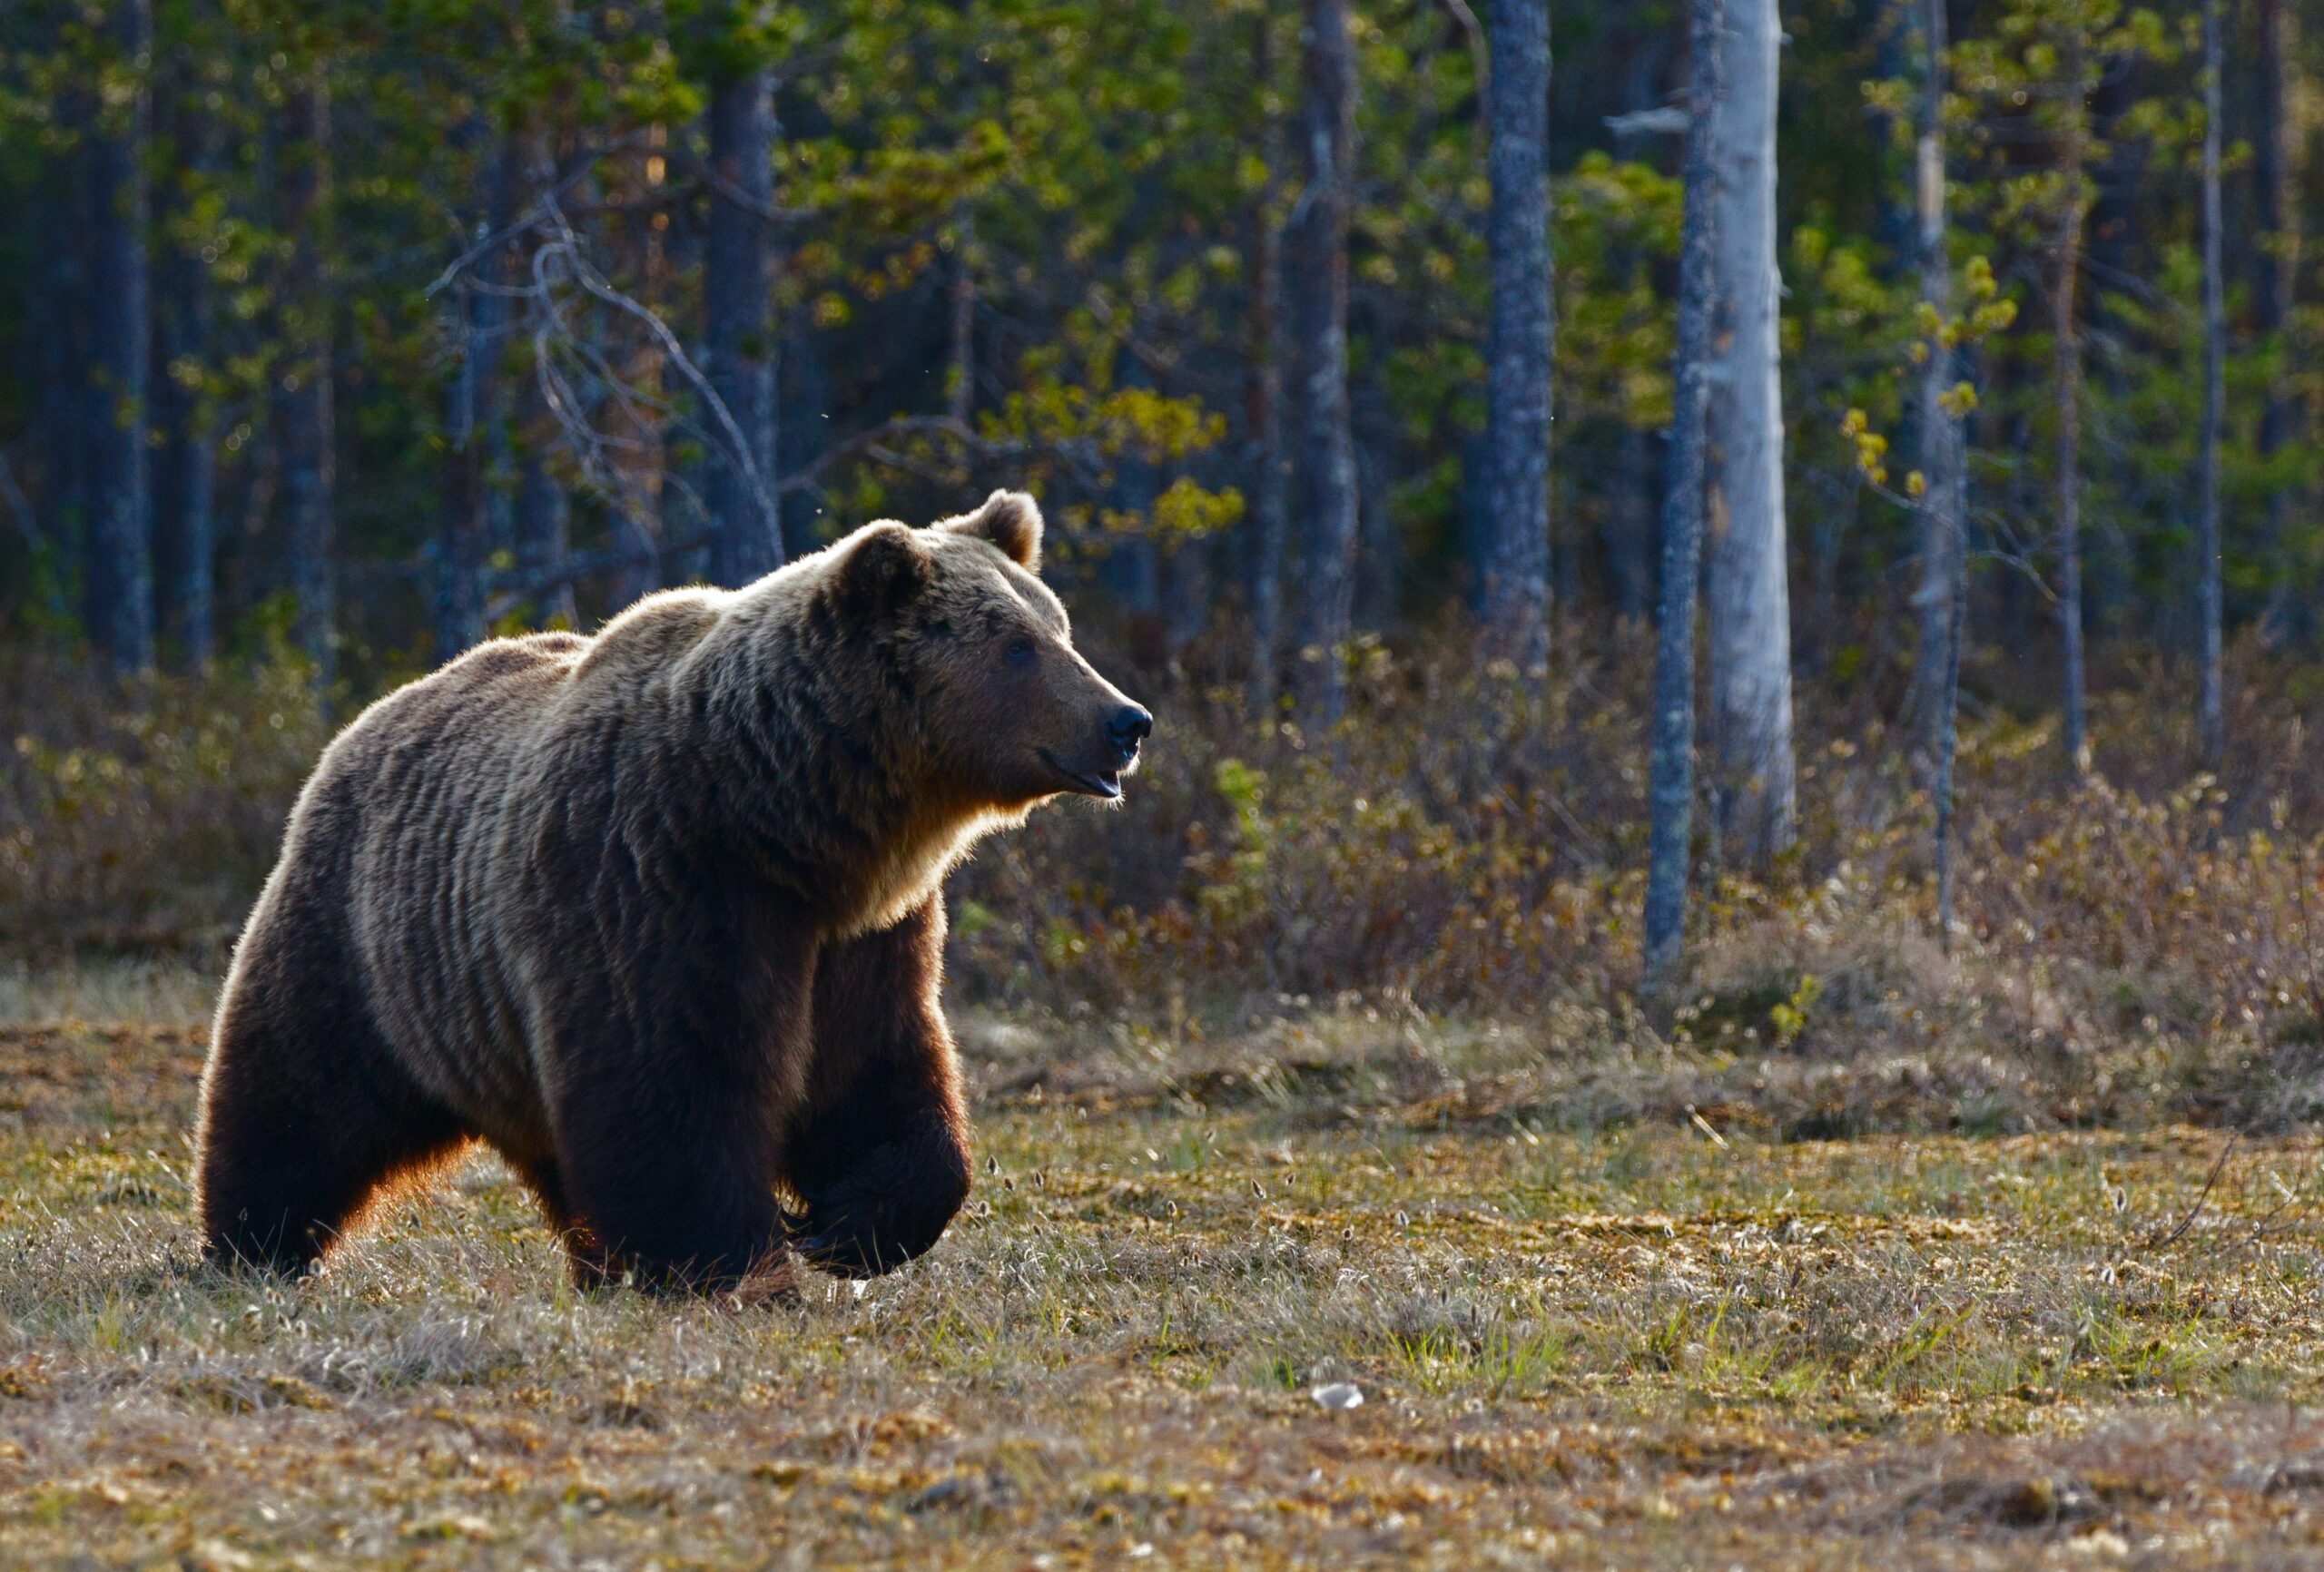 A sow grizzly did not stick to her typical 70-mile home range.